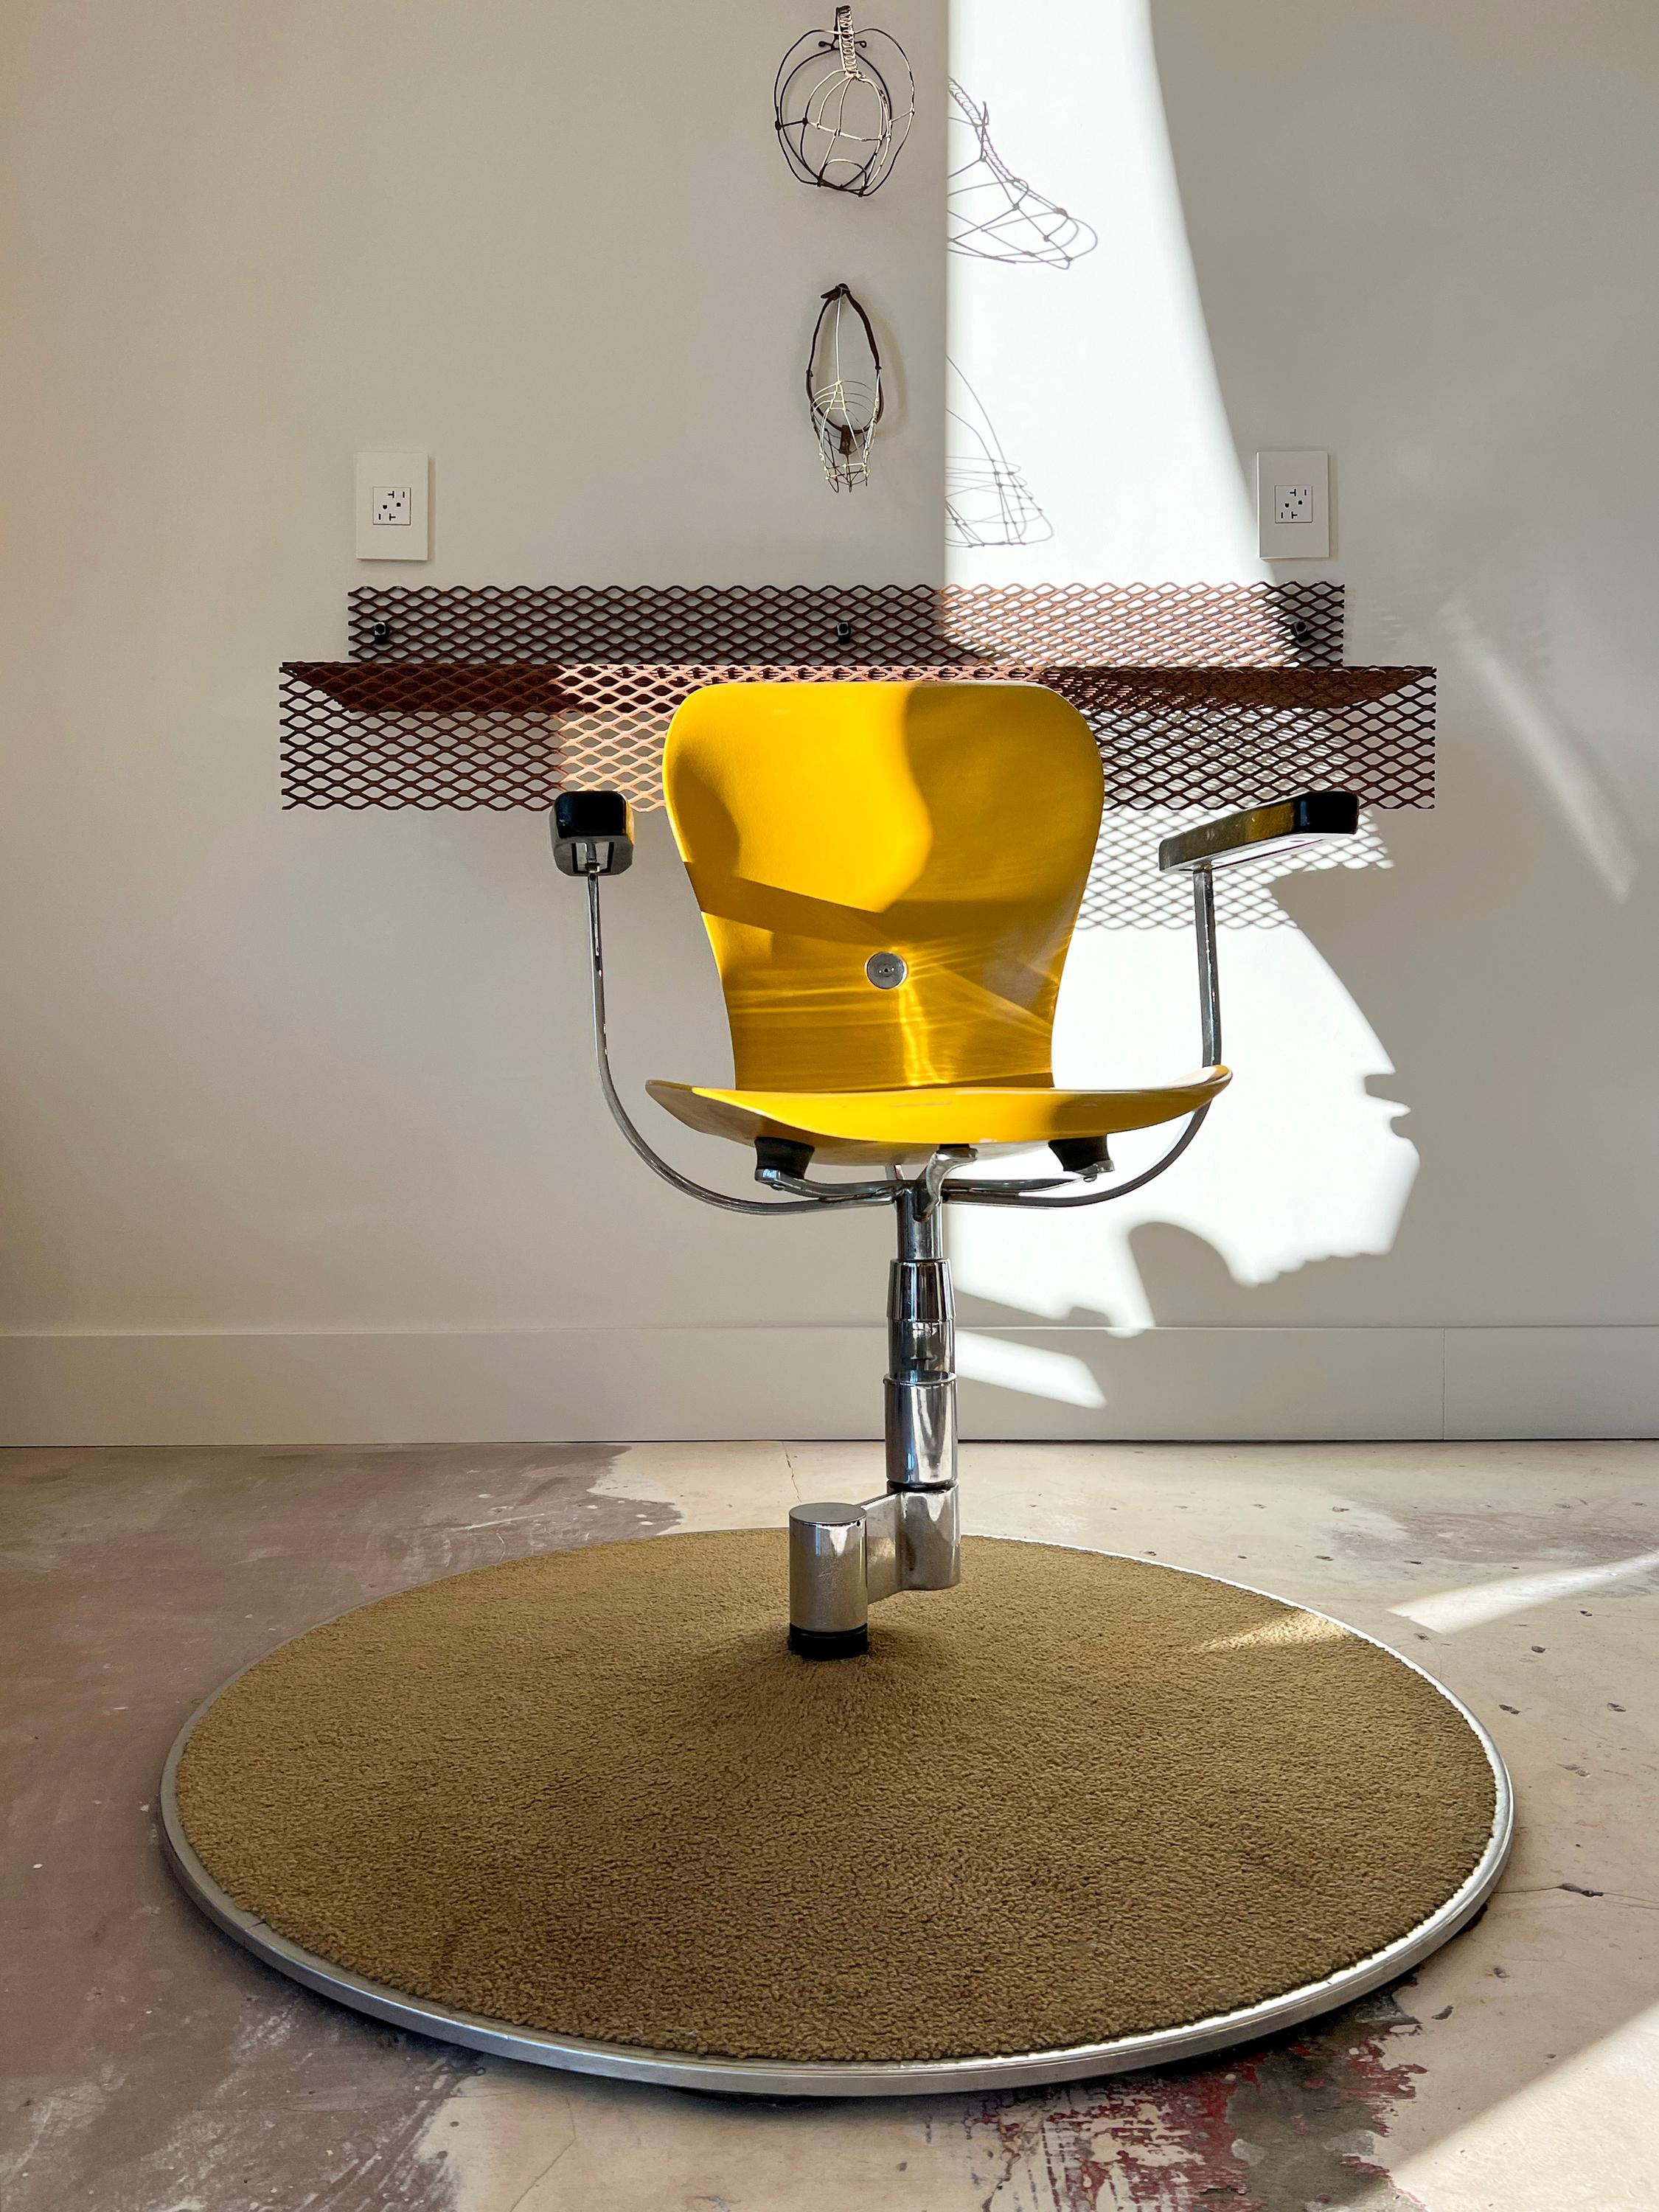 Designed in 1962 by Gideon Kramer, the Recorder's Chair was used on the observation deck of the Space Needle at the World's Fair in Seattle. Swings and rotates smoothly, all gliding points have been oiled and work properly. Upholstered base is